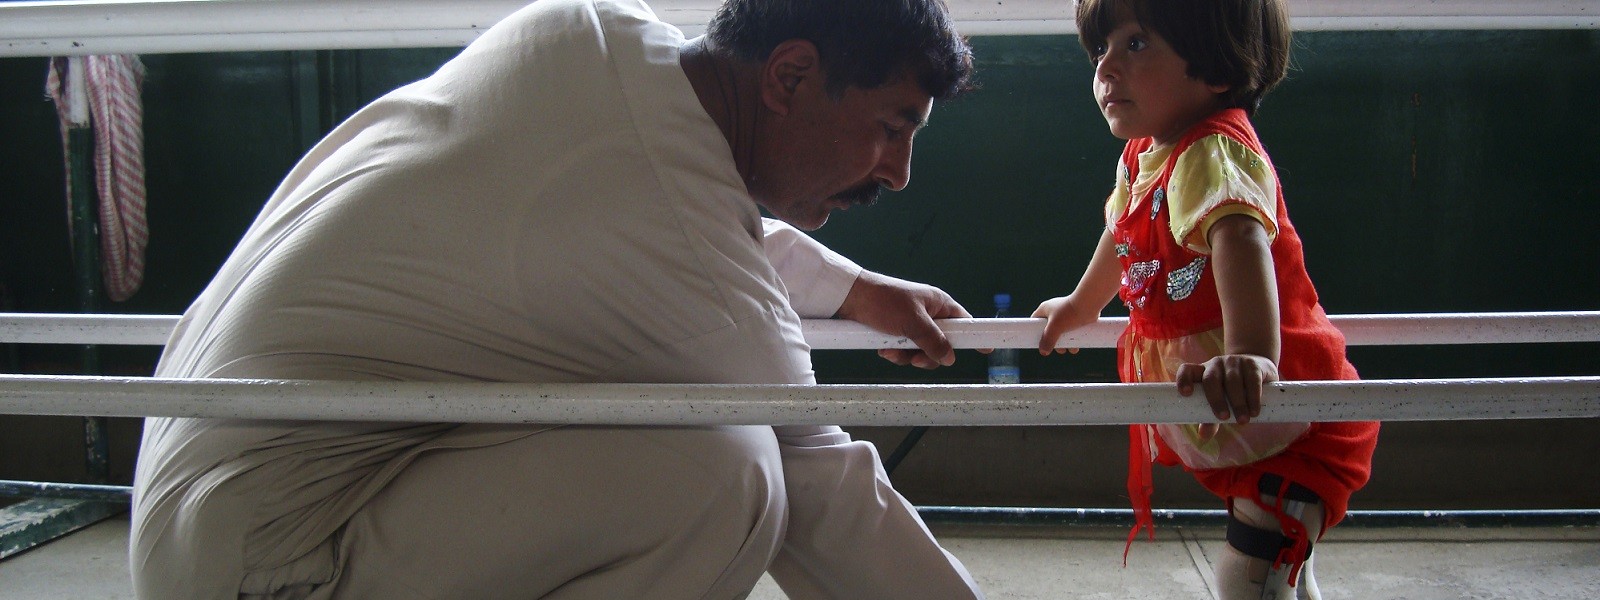 Support our work for people with disabilities in Afghanistan.